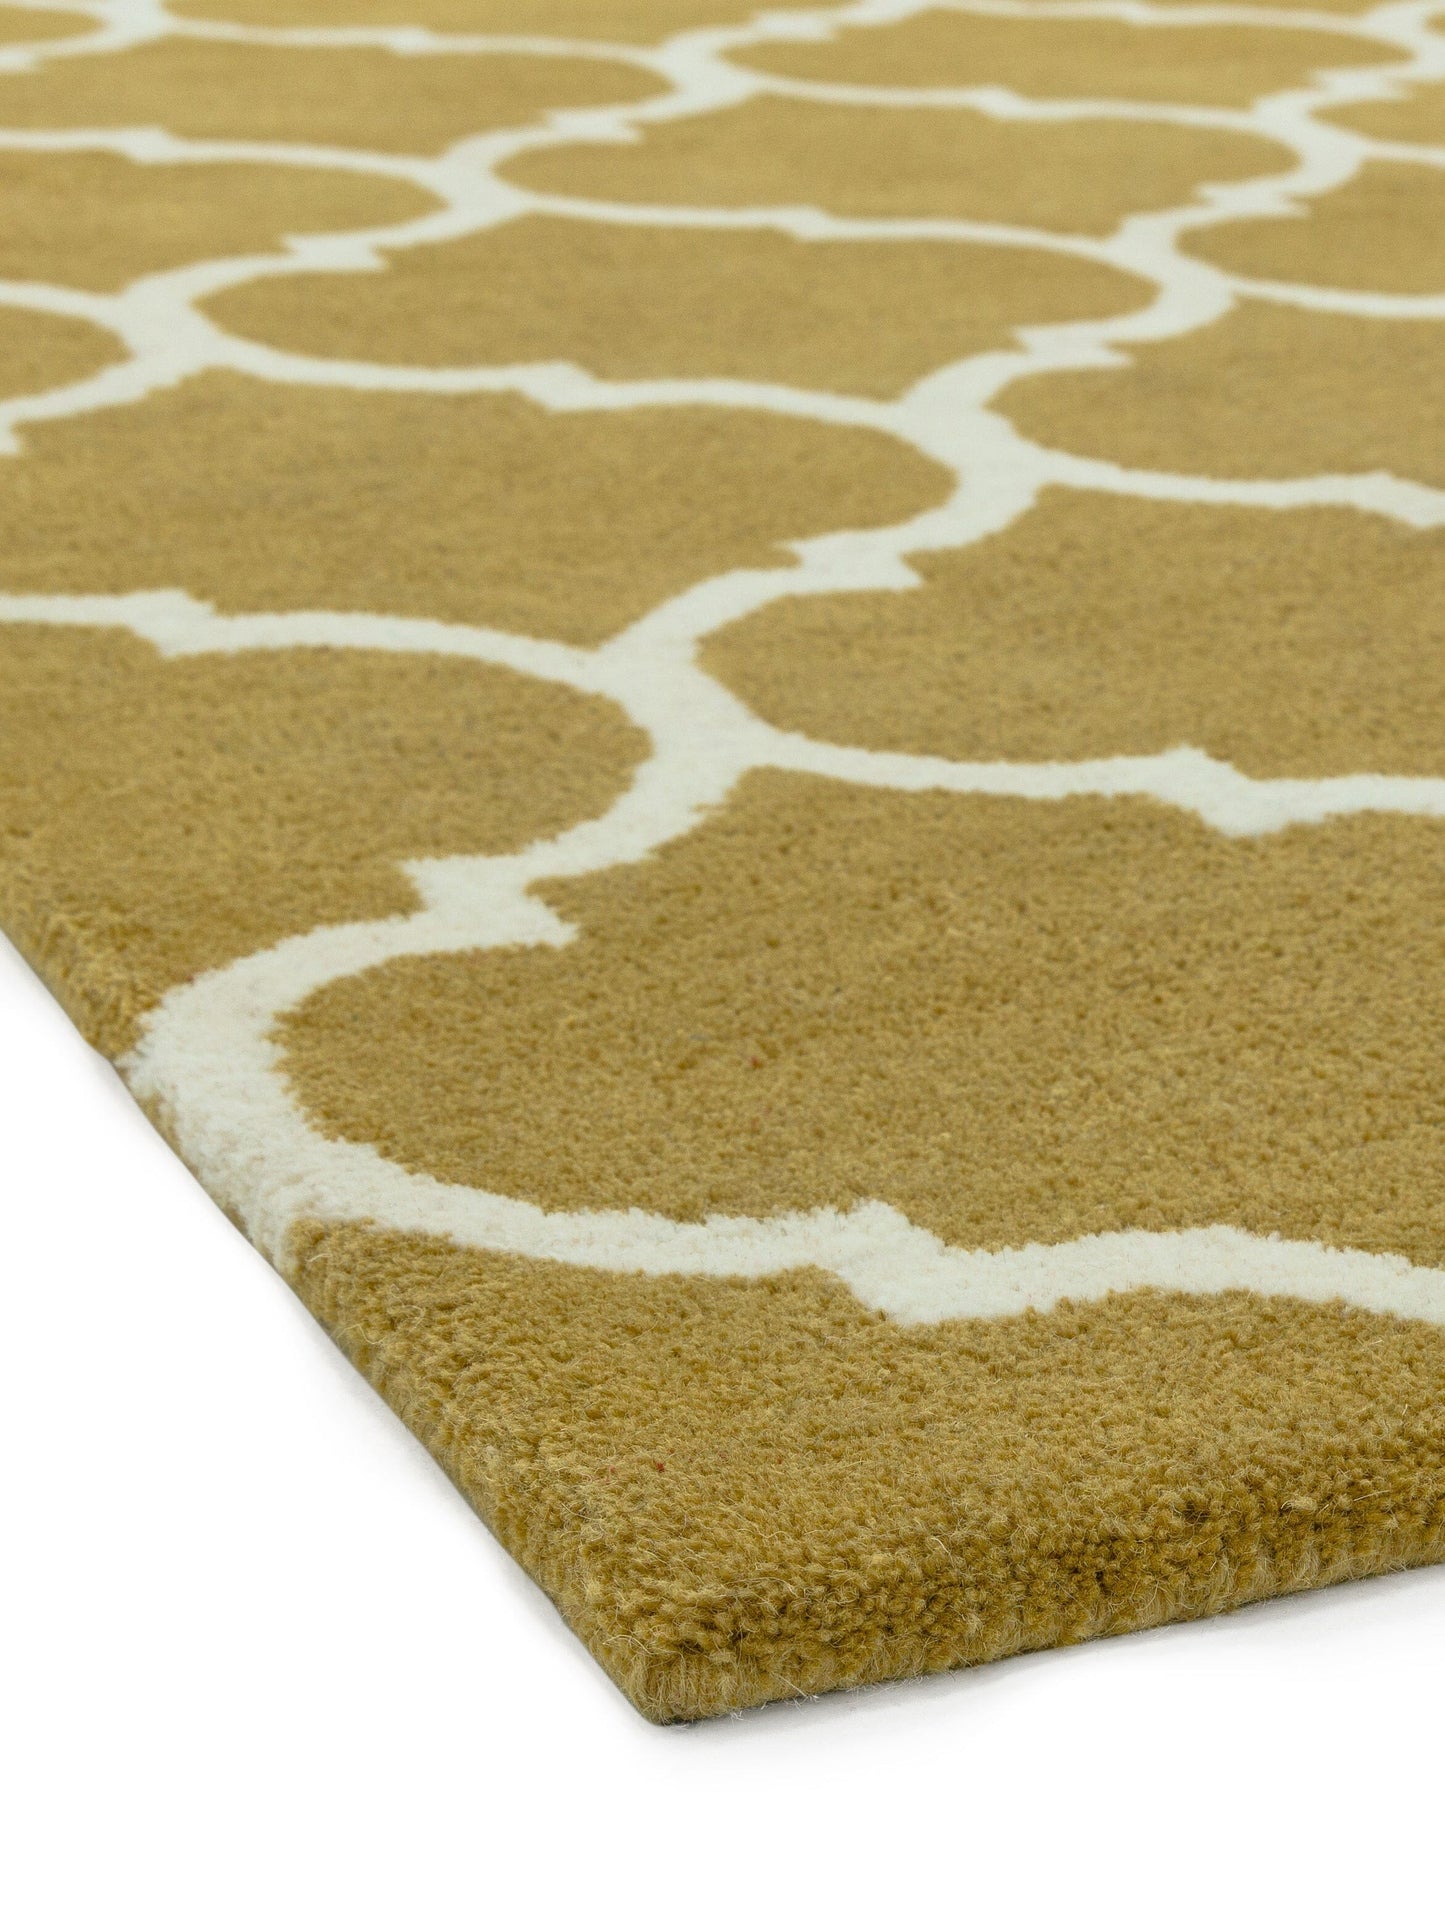 Asiatic Carpets Albany Handtufted Rug Ogee Ochre - 200 x 290cm